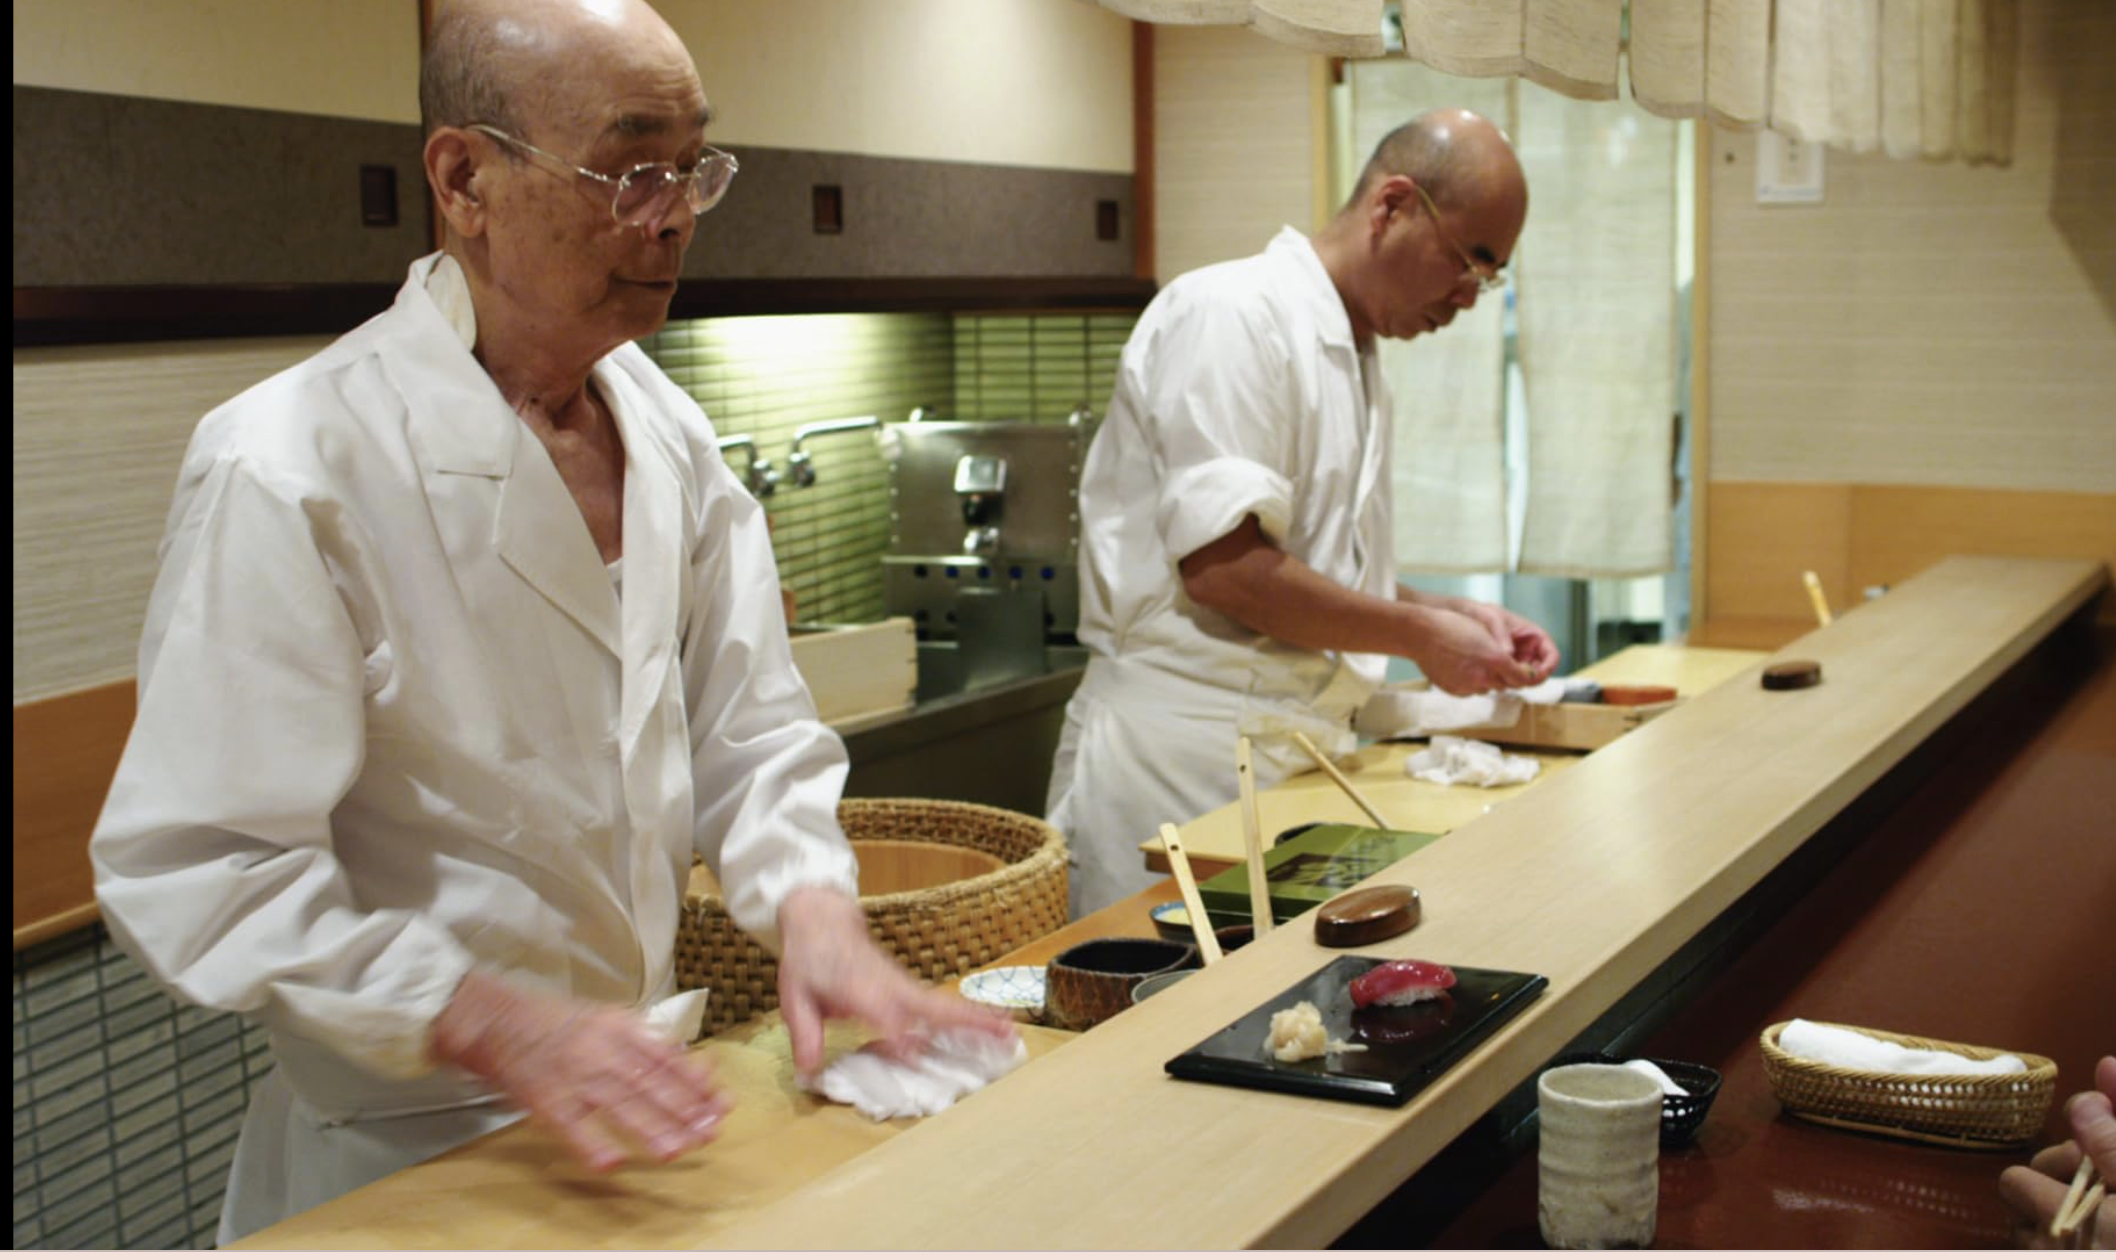 <p>This mesmerizing documentary delves into the life and artistry of Jiro Ono, an 85-year-old sushi master, and owner of Sukiyabashi Jiro, a tiny Michelin-starred restaurant in Tokyo. Through stunning visuals and insightful interviews, the film celebrates the dedication and precision that goes into creating the perfect piece of sushi, showcasing Jiro's skillful craftsmanship and the mouthwatering sushi he serves. Our five cents:  make sure your order good sushi while you watch.</p>